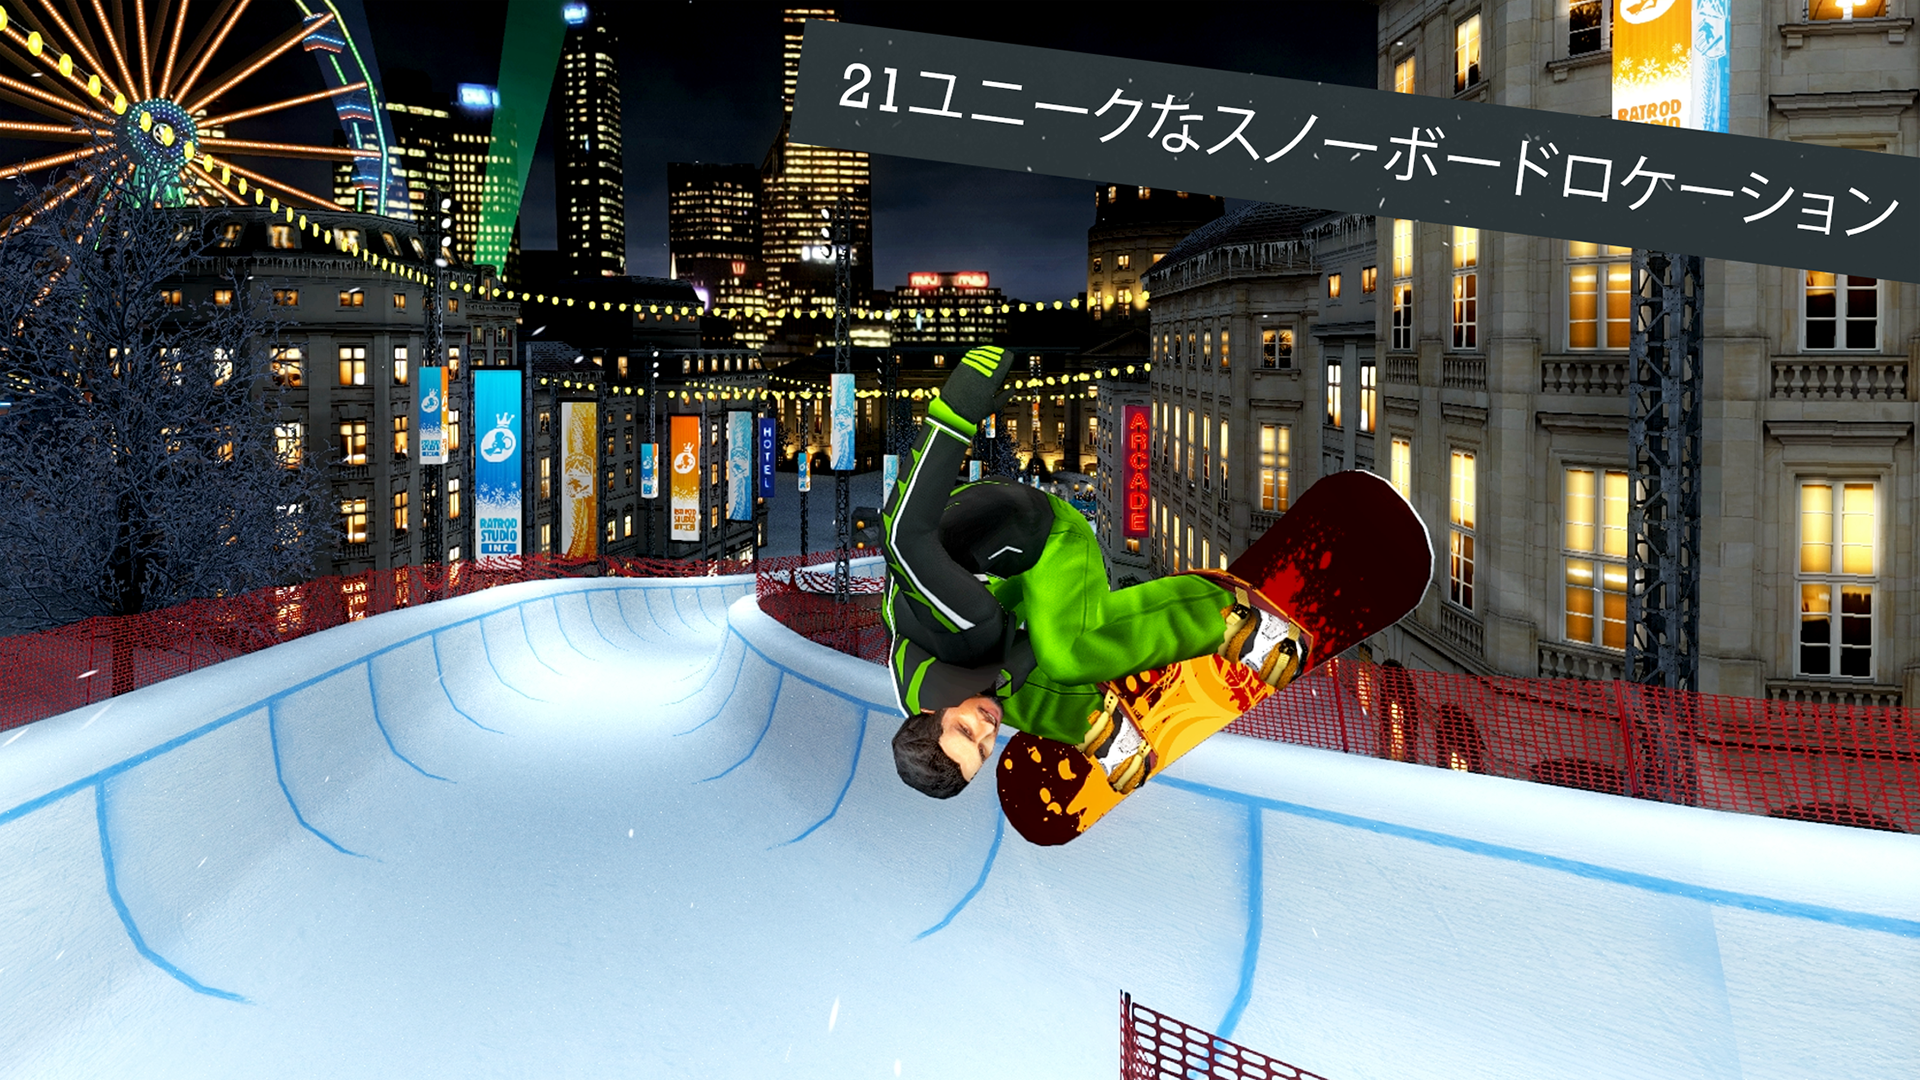 Screenshot 1 of Snowboard Party: World Tour 1.10.0.RC